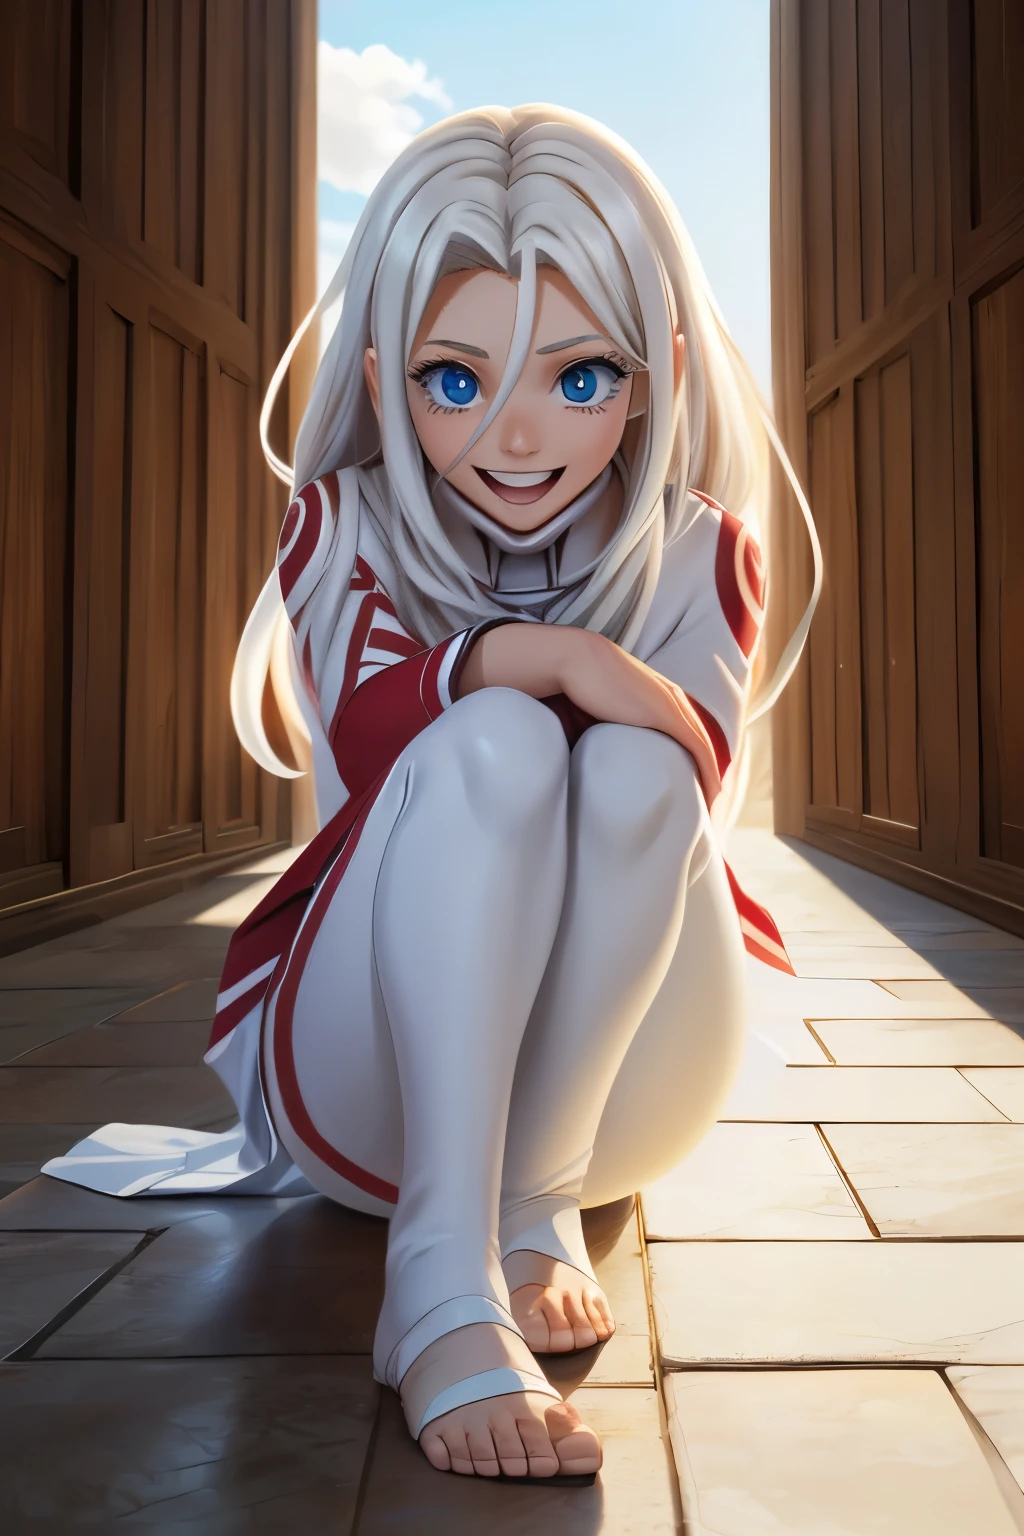 ((ultra quality)), ((Masterpiece artwork)), albino girl Shiro, Shiro from the anime Deadman Wonderland, ((cabelo longo offwhite)), Beautiful cute face, beautiful female lips, charming beauty, ((Joyful expression on your face)), is looking at the camera ((kind smile)), ((cor da pele: offwhite)), Body shine, ((beautiful detailed female eyes)), ((Eyes red)), beautiful female hands, ((perfect female figure)), ideal female body shapes, Beautiful waist, beautiful feet, muslos grandes, beautiful ass, ((Subtle and beautiful)), A seductive posture ((approximate face)), ((wearing Shiro&#39;s costume, offwhite Shiro suit)), fund: large hall of the future prison with offwhite walls, ((Depth of field)), ((high quality clear image)), ((sharp details)), ((highy detailed)), realisitic, Professional photo session, ((Focus Clear)), ((animated cartoon)), the anime